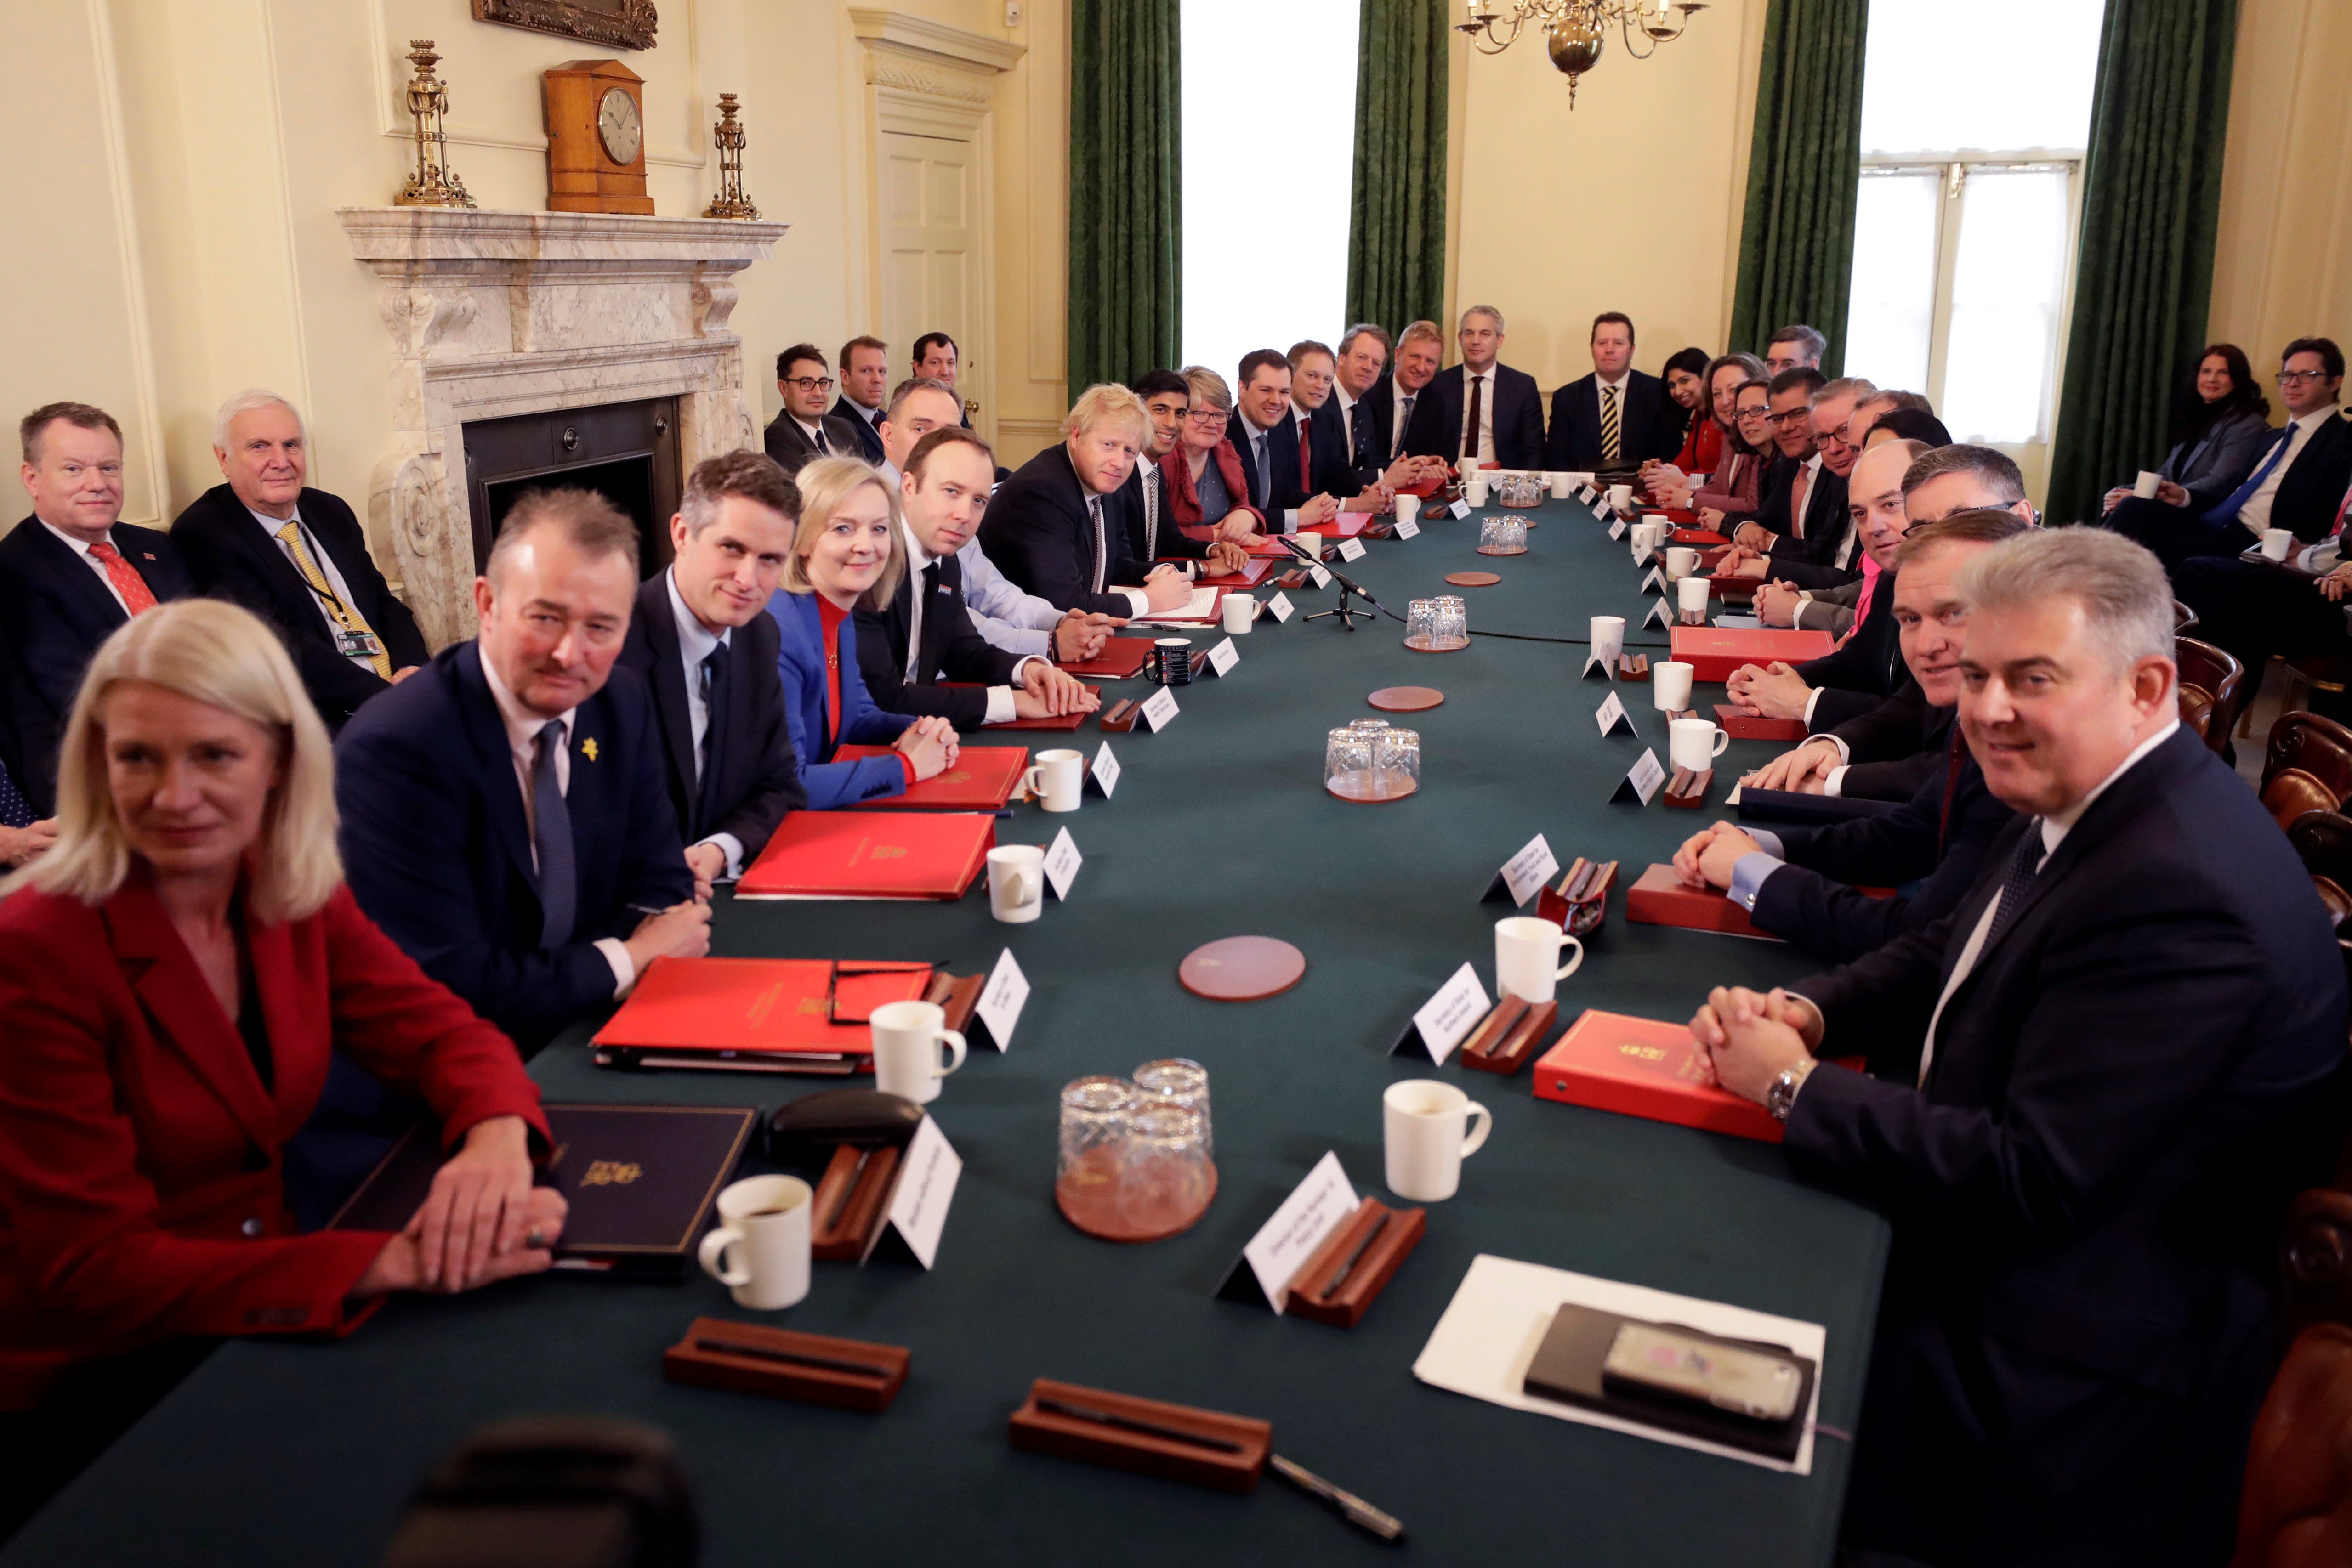 Britain's Prime Minister Boris Johnson chairs his first meeting of the cabinet the day after a reshuffle at 10 Downing Street in central London on February 14, 2020